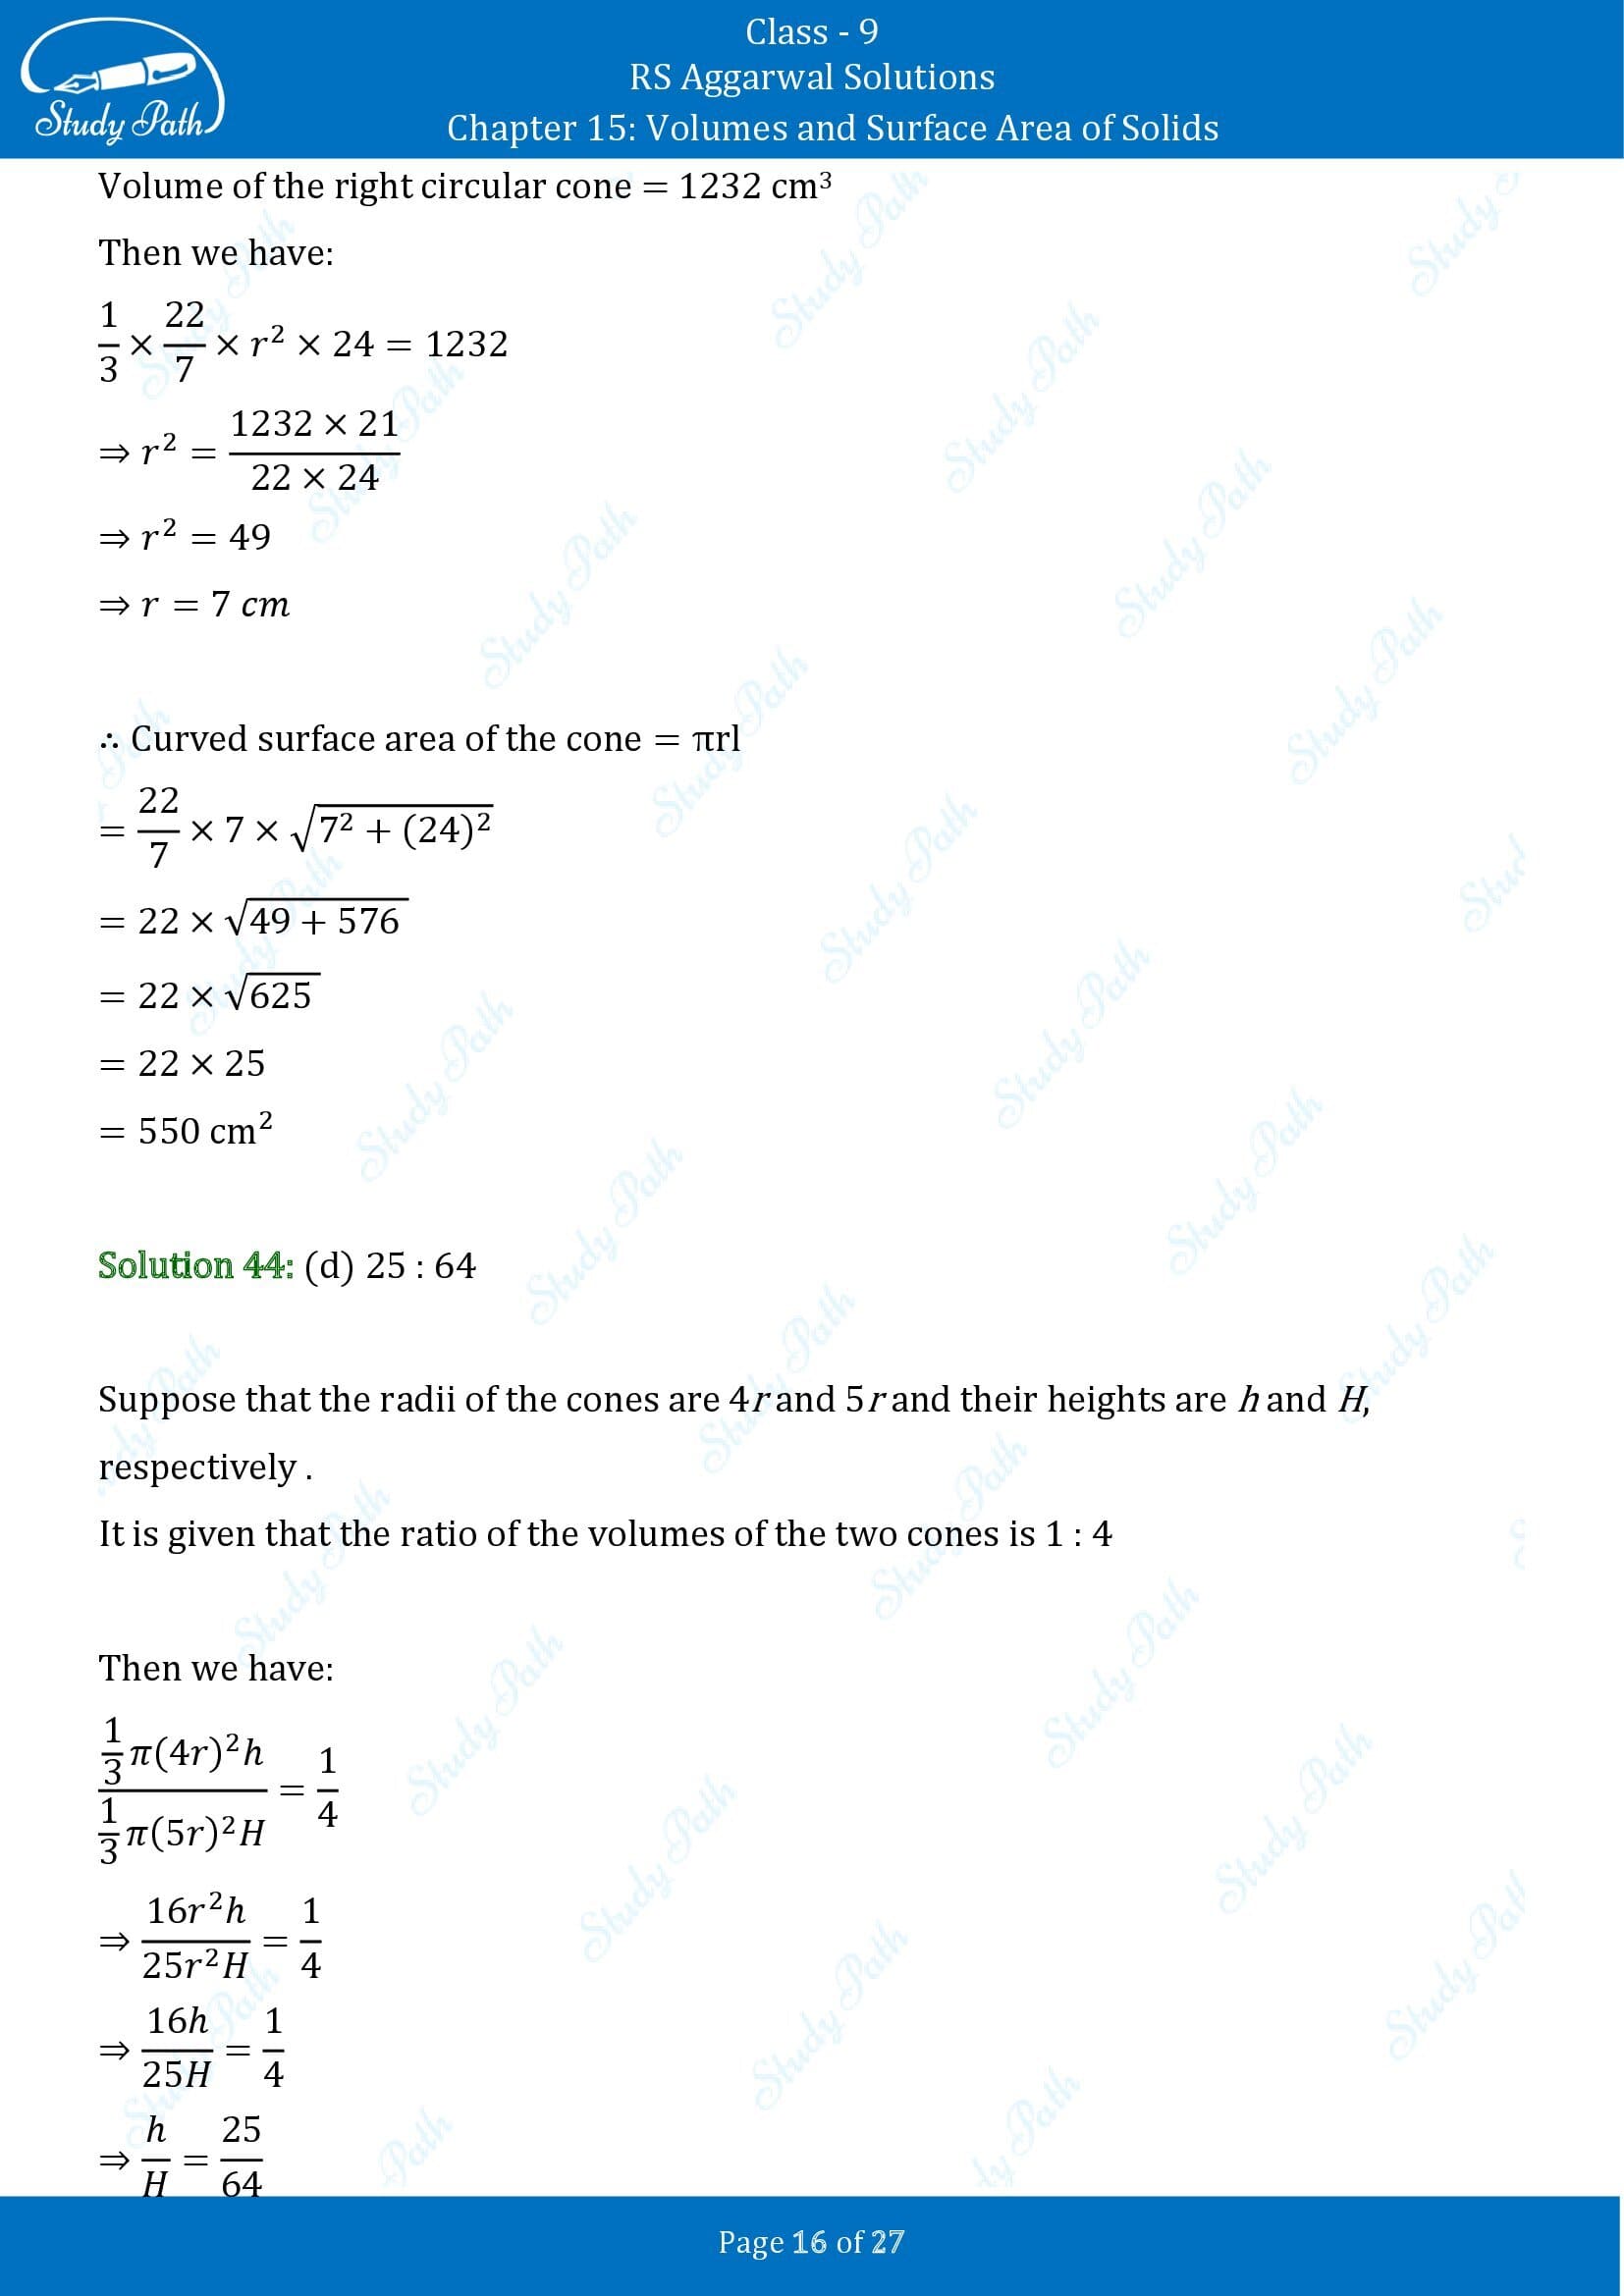 RS Aggarwal Solutions Class 9 Chapter 15 Volumes and Surface Area of Solids Multiple Choice Questions MCQs 00016